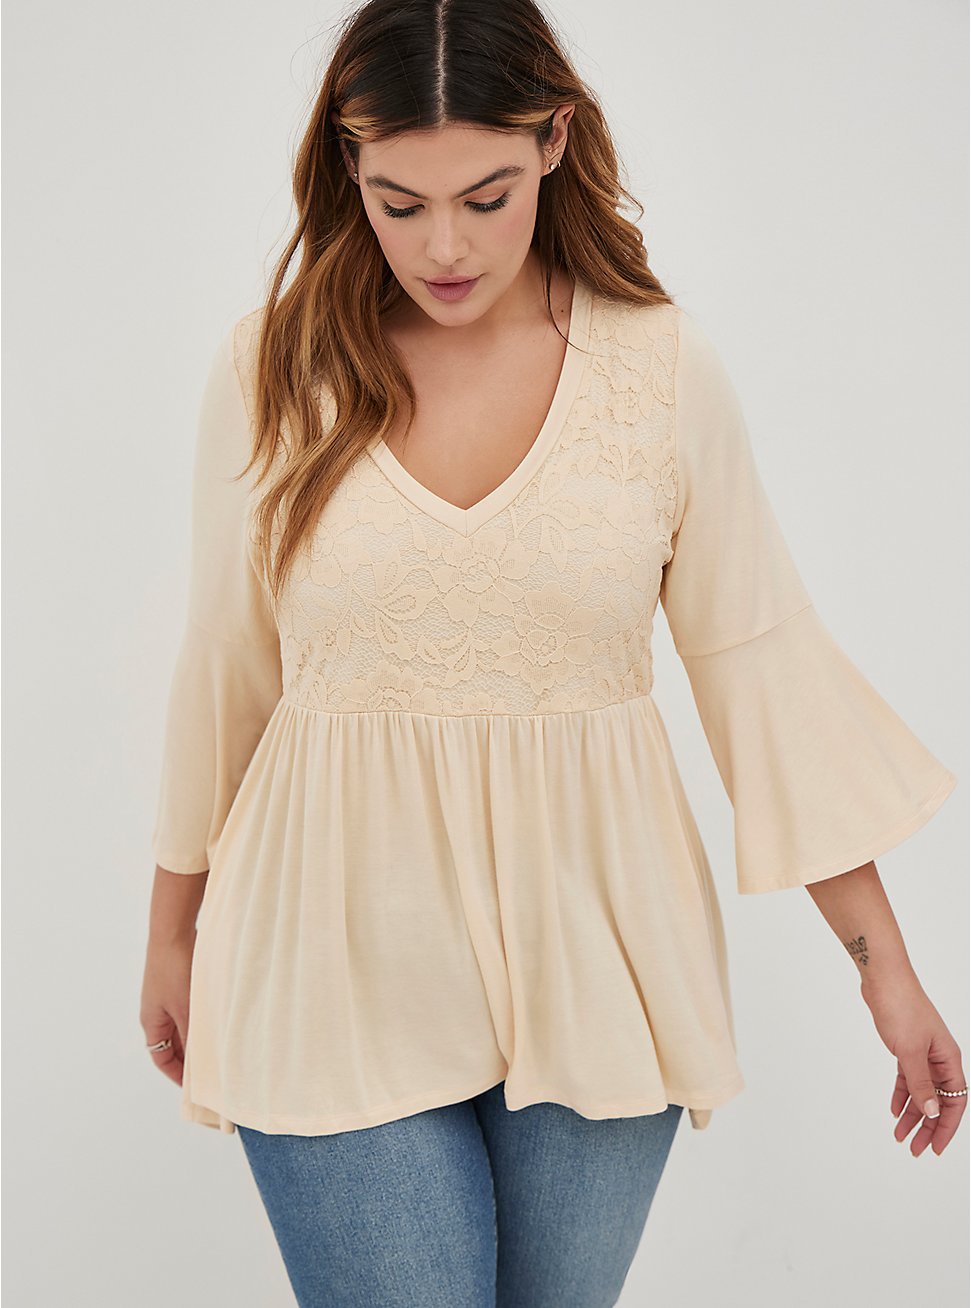 Plus Size Babydoll Tunic Top - Jersey Sand, GREY, hi-res